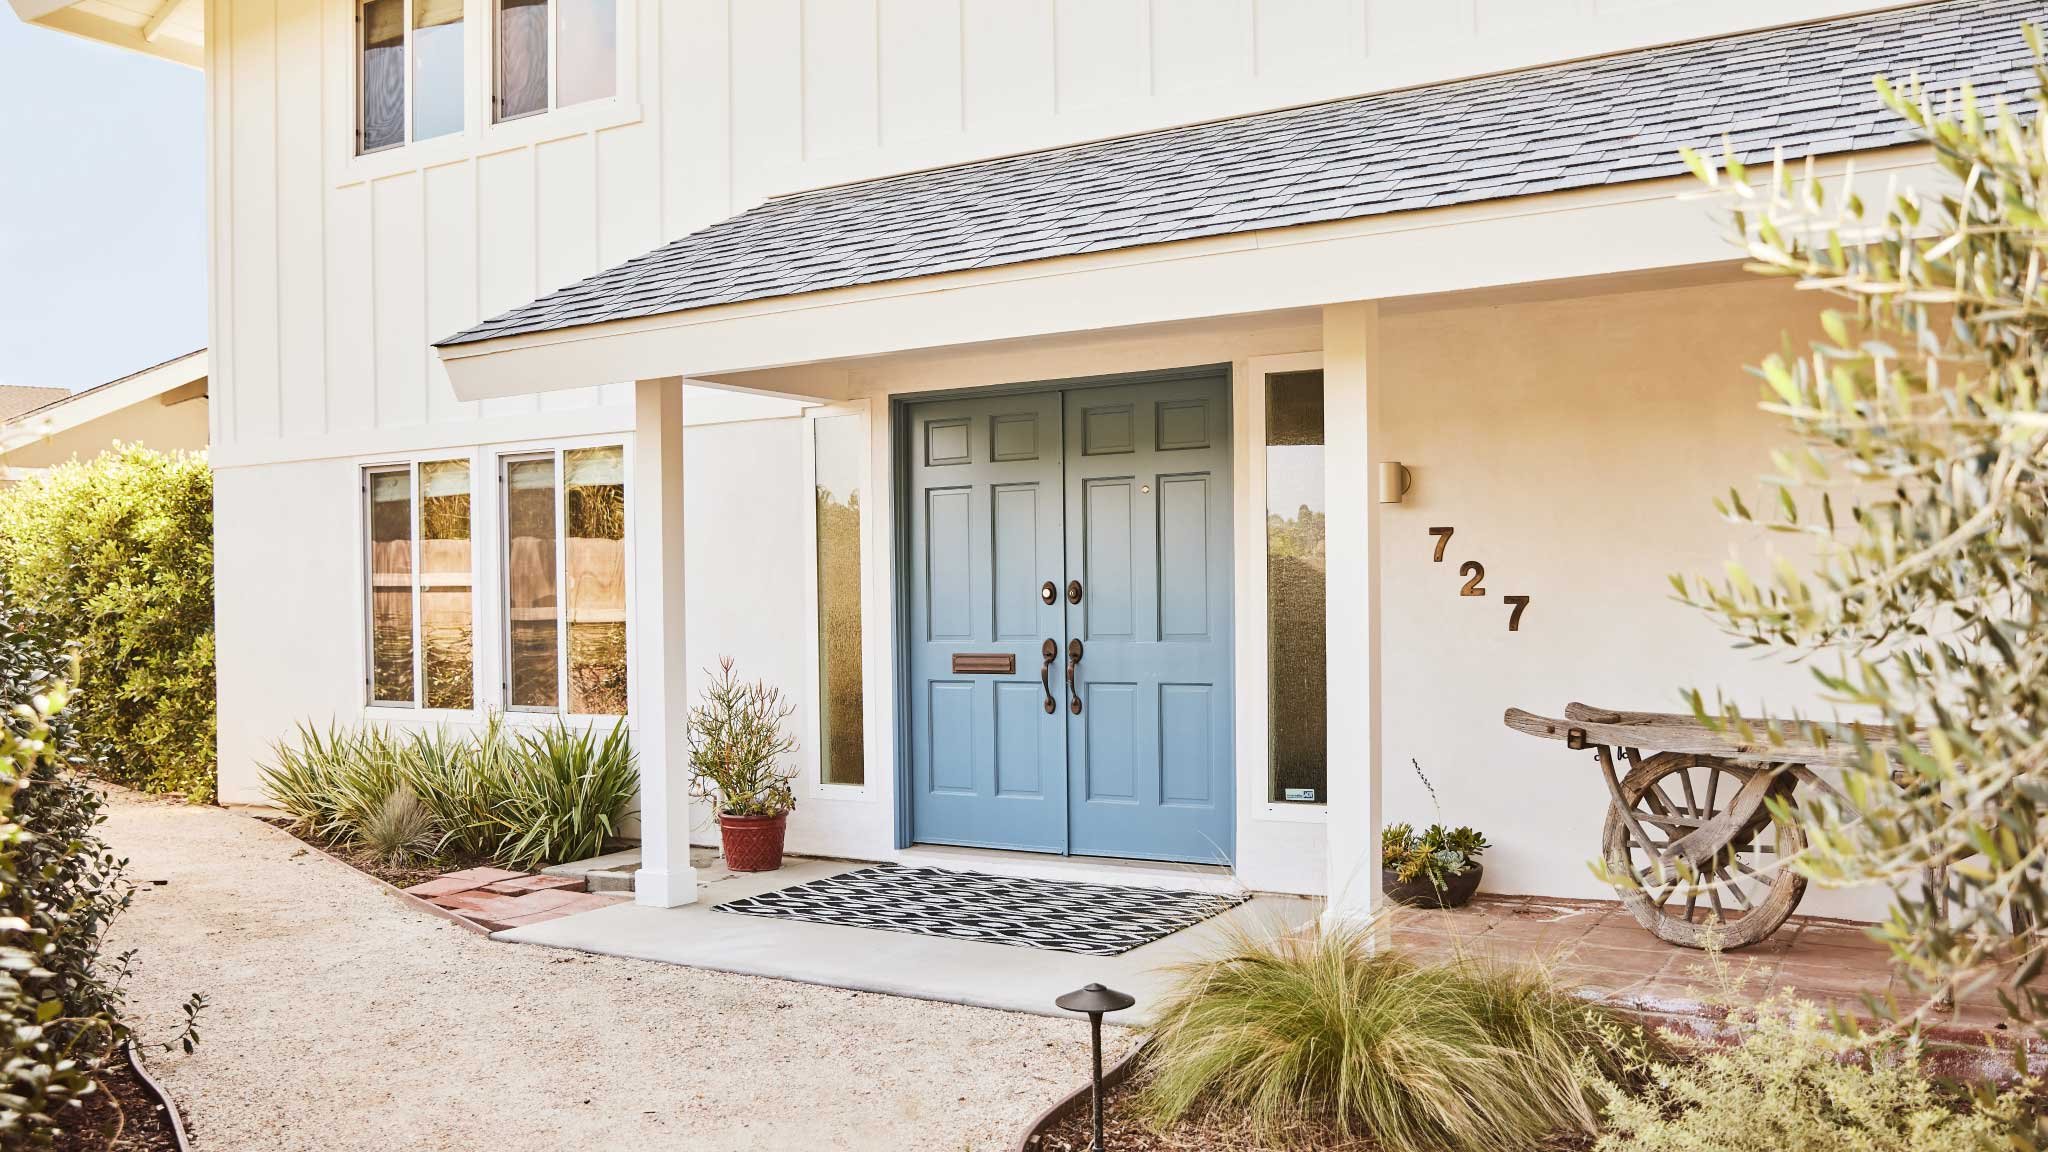 Stylish home facade with blue front doors, gravel path, and ornamental plantings in yard